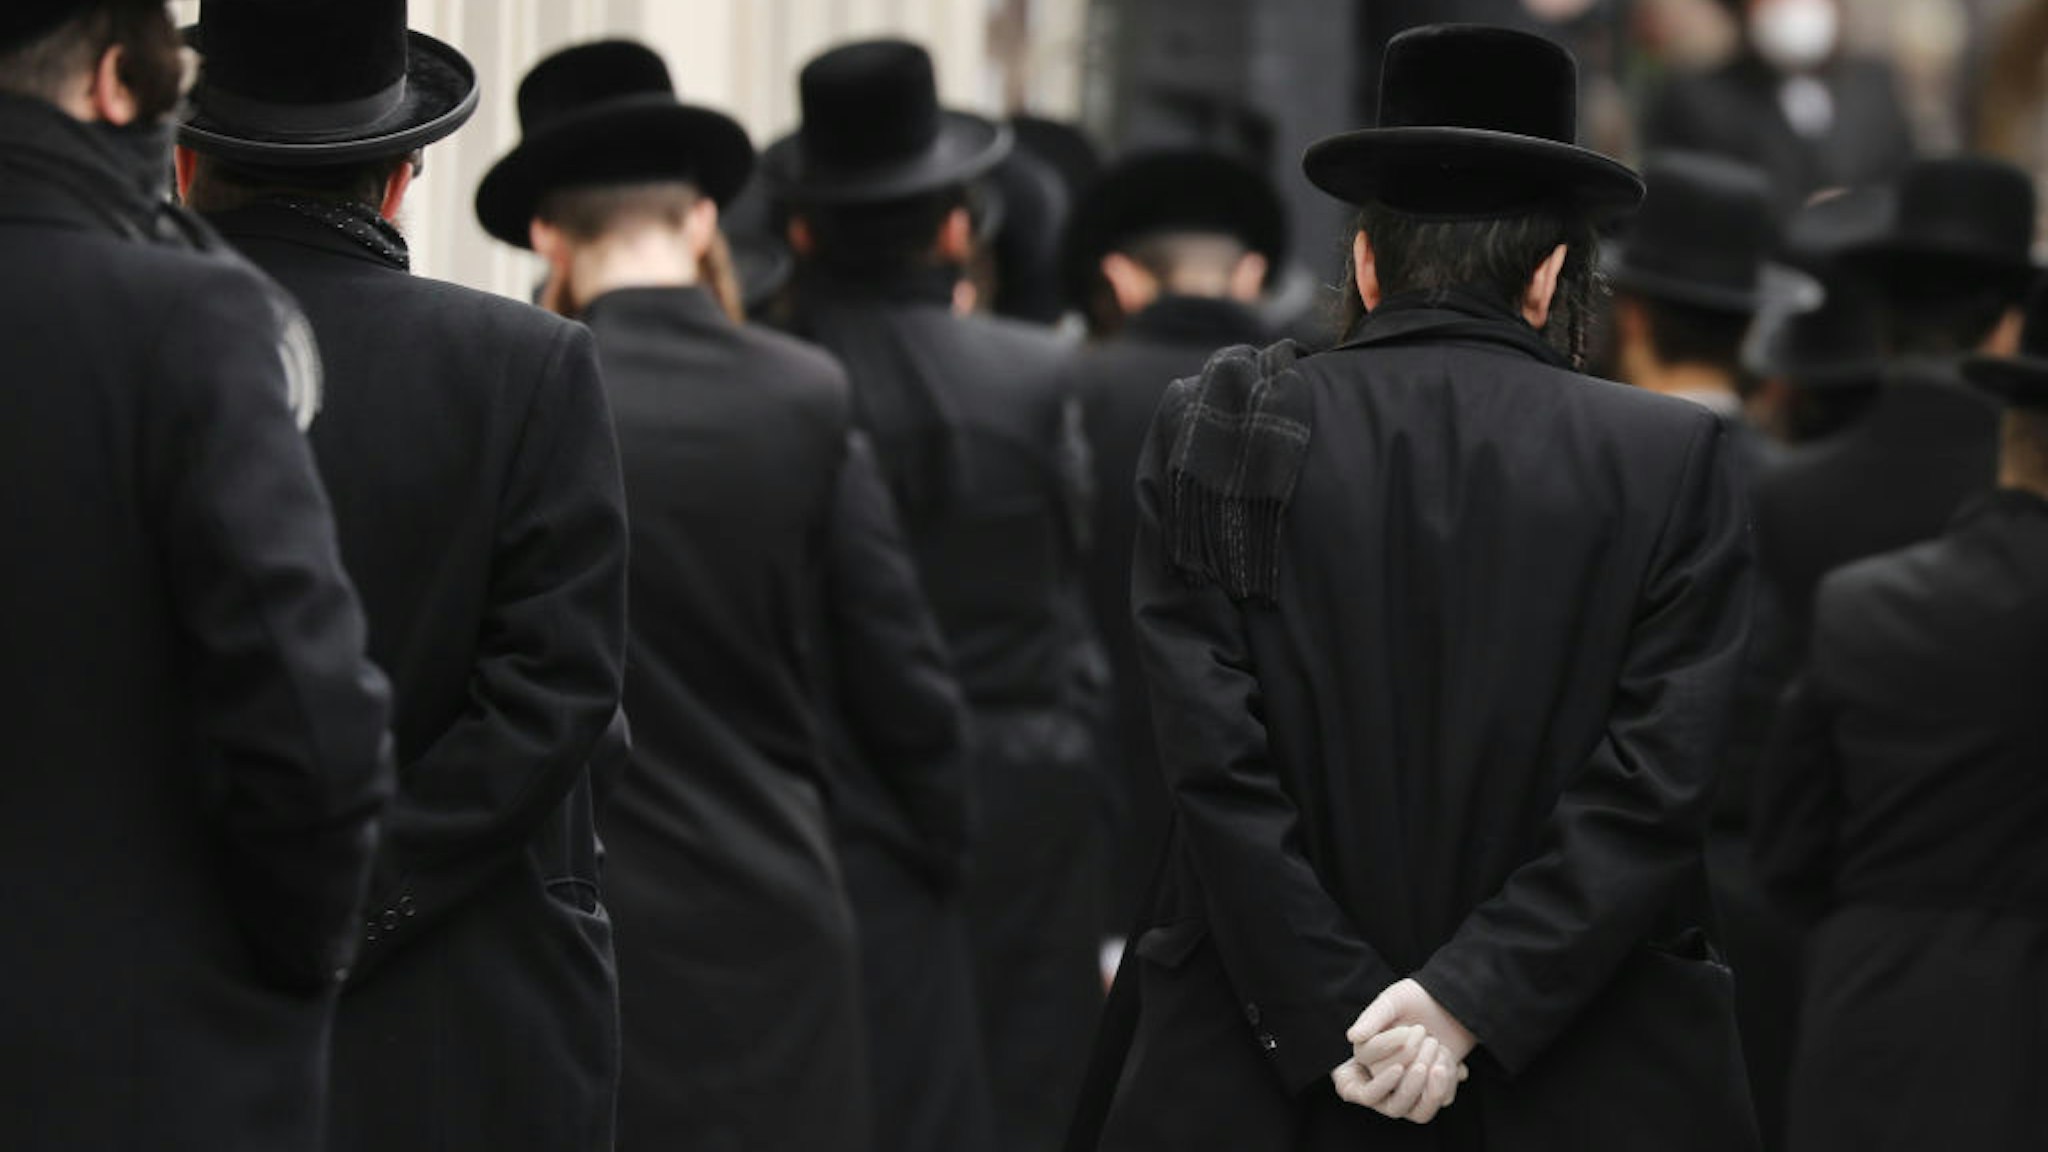 Hundreds of members of the Orthodox Jewish community attend the funeral for a rabbi who died from the coronavirus in the Borough Park neighborhood which has seen an upsurge of (COVID-19) patients during the pandemic on April 05, 2020 in the Brooklyn Borough of New York City. Hospitals in New York City, which has been especially hard hit by the coronavirus, are facing shortages of beds, ventilators and protective equipment for medical staff. Currently, over 122,000 New Yorkers have tested positive for coronavirus. (Photo by Spencer Platt/Getty Images)